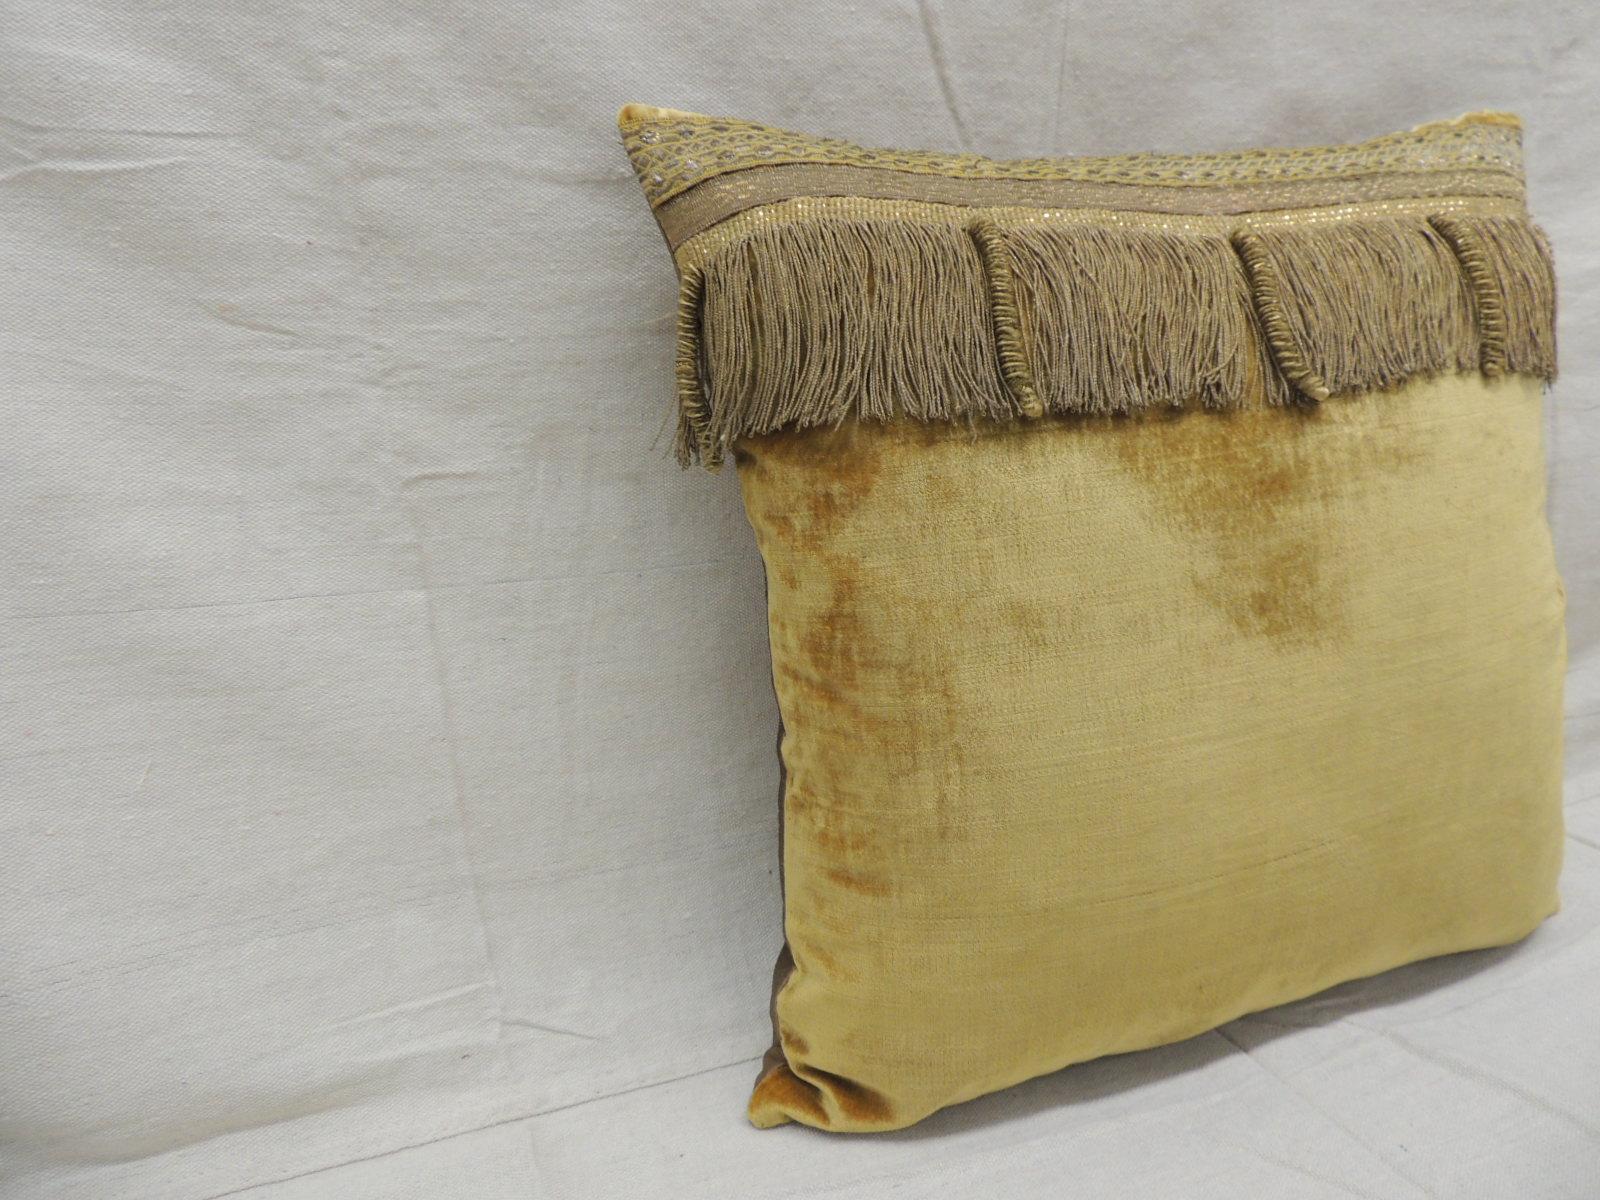 Antique gold velvet decorative square pillow embellished with 19th century metallic trims
and gold metallic threads fring. Golden silk backing.
Decorative pillow handcrafted and designed in the USA.
Closure by stitch (no zipper closure) with